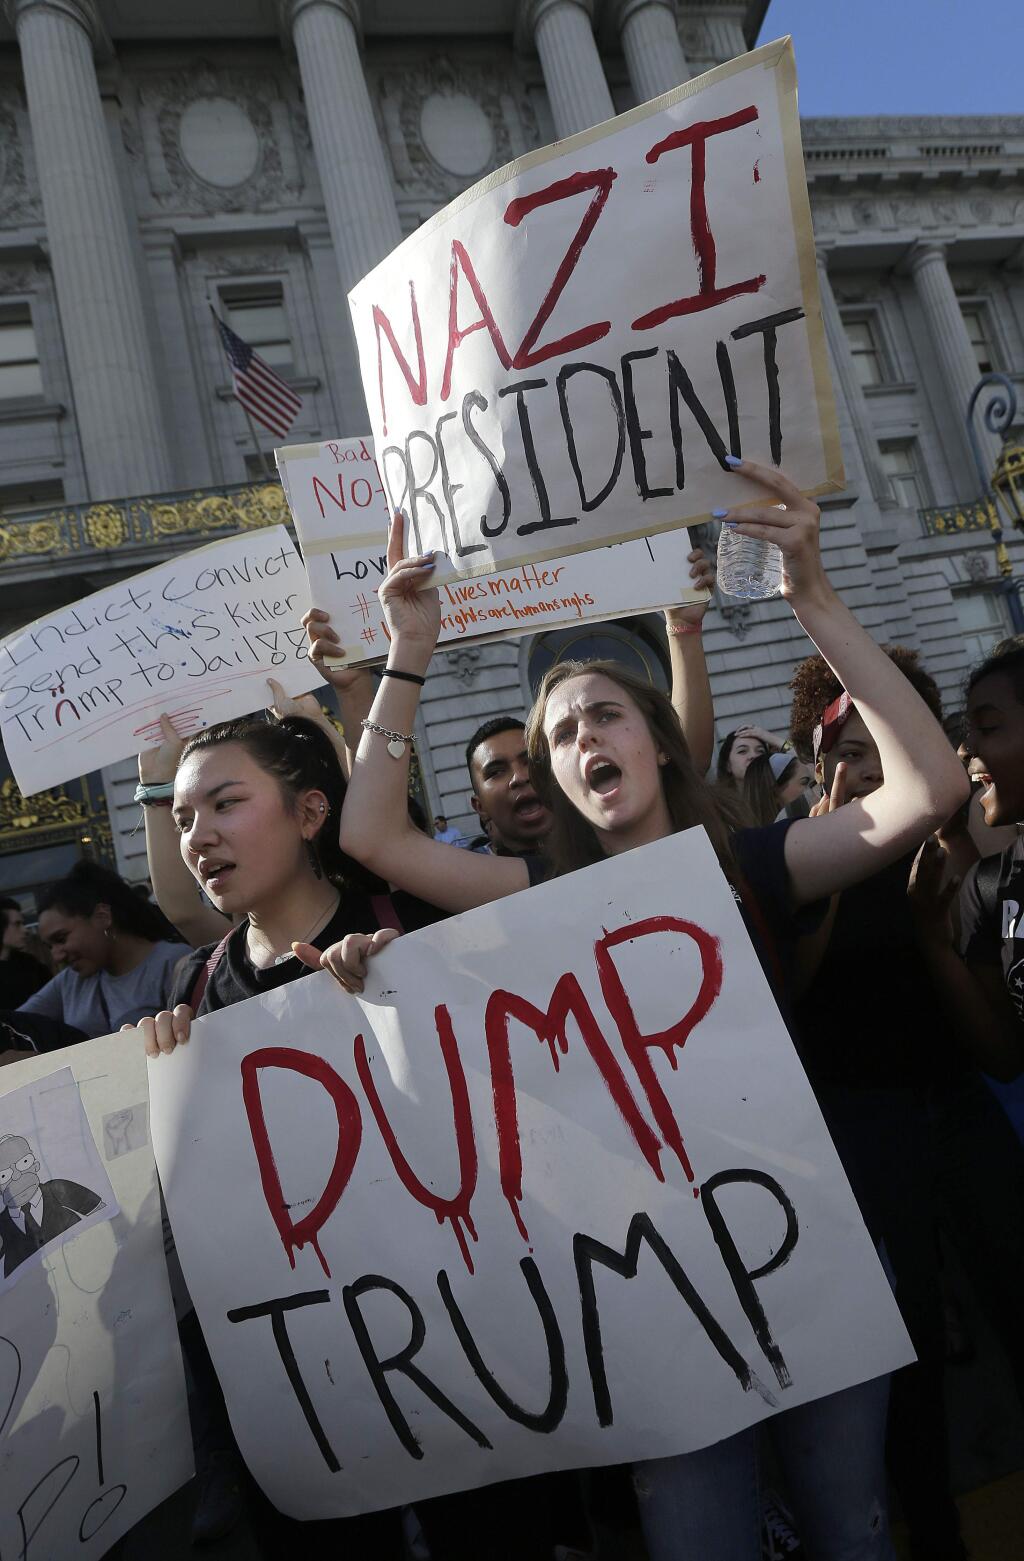 FILE - In this Nov. 10, 2016, file photo, Mission High School students Hope Robertson, right, yells as she protests with other high school students in opposition of Donald Trump's presidential election victory in front of City Hall in San Francisco. The union representing San Francisco's public school teachers is circulating a classroom lesson plan that calls President-elect Donald Trump a racist and sexist man. The United Educators of San Francisco posted the plan on its website and distributed the plan via an email newsletter. The union represents about 6,000 members. (AP Photo/Jeff Chiu, File)